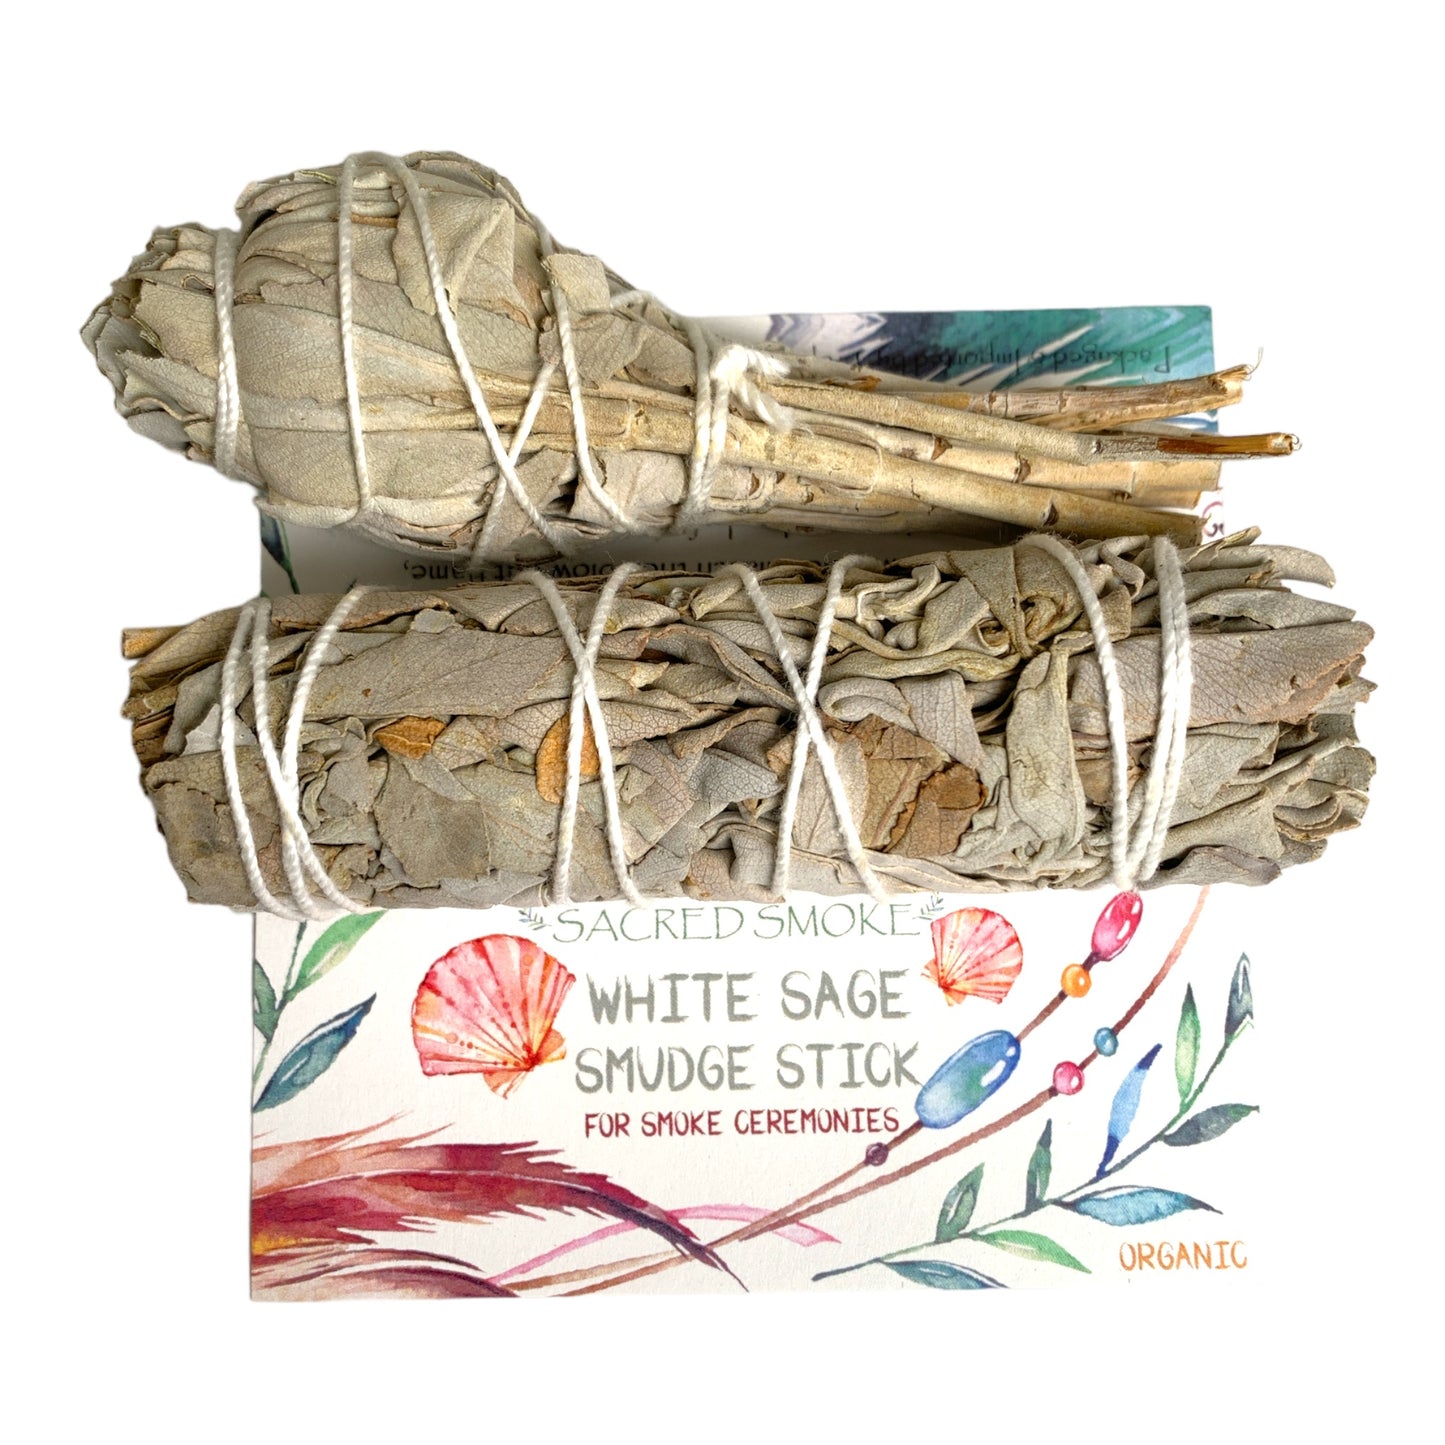 PK of 2 WHITE SAGE 4 inch Combo Torch & Straight Smudge Stick Packaged with Header